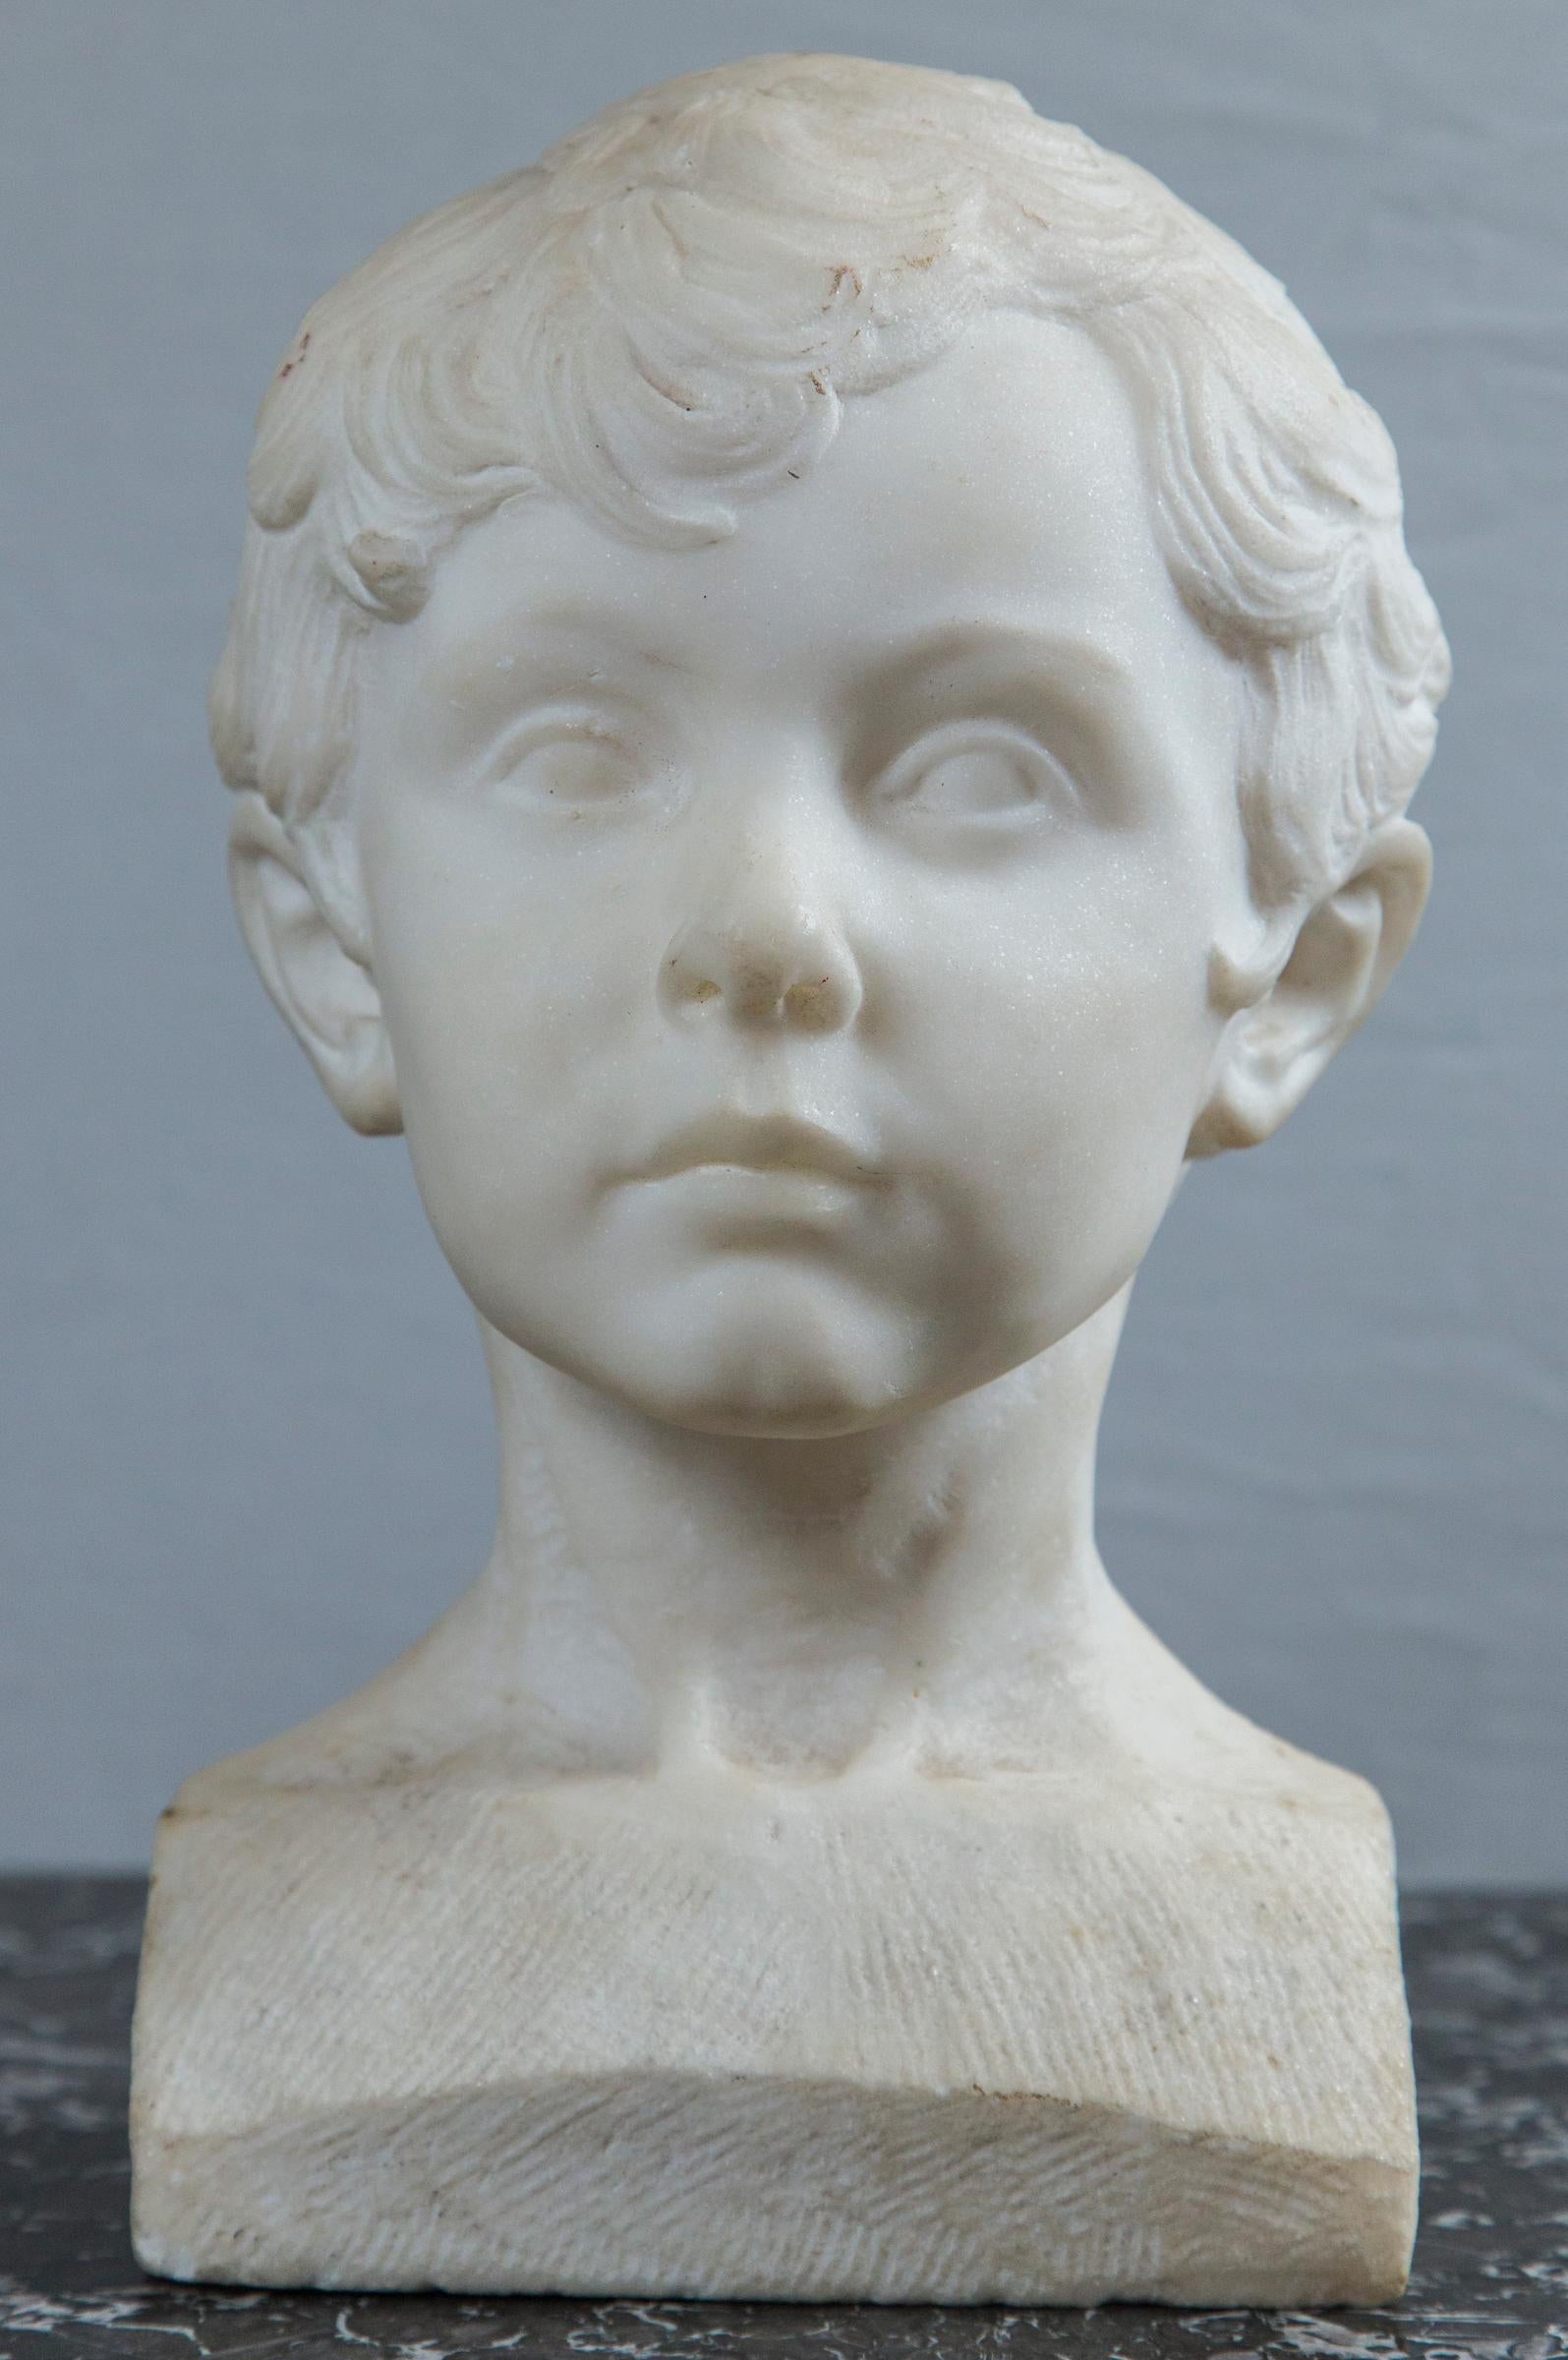 Delicately carved features on this unsigned bust.
The base measures 7 wide and 5.5 deep
The chisel marks are evident on the back and sides of the base.